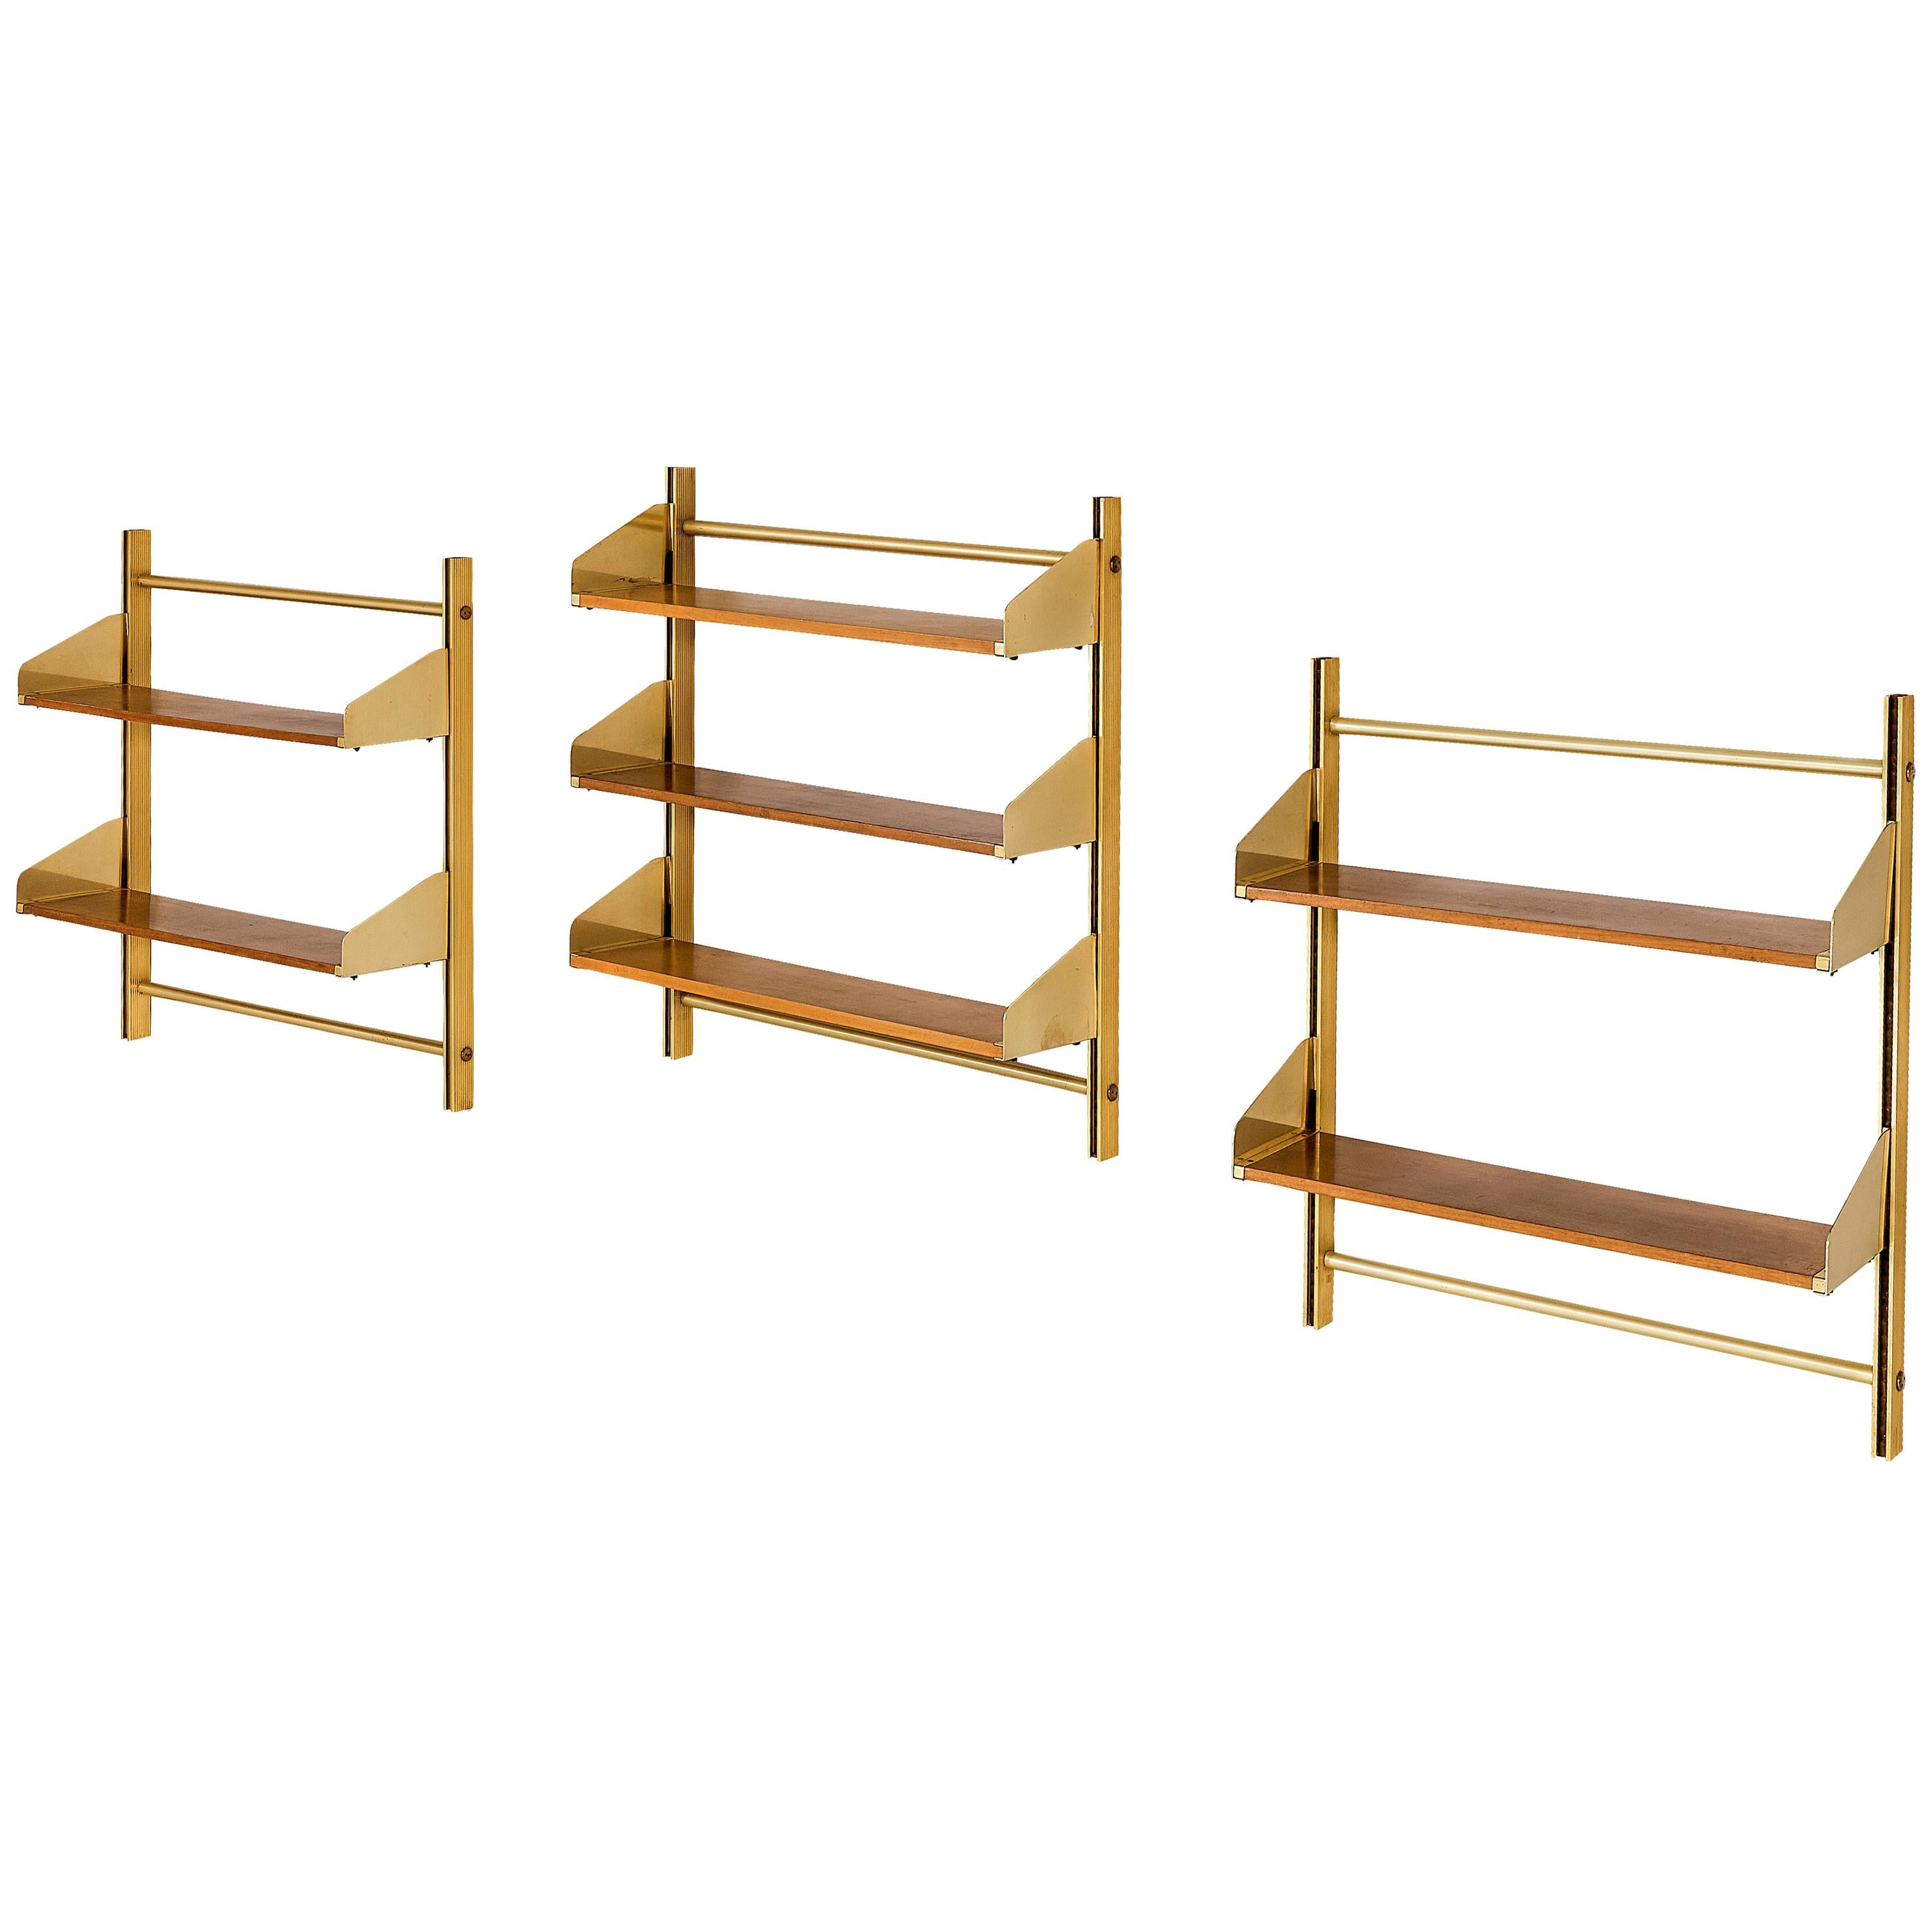 Feal Wall-Mounted Shelves in Teak and Brass